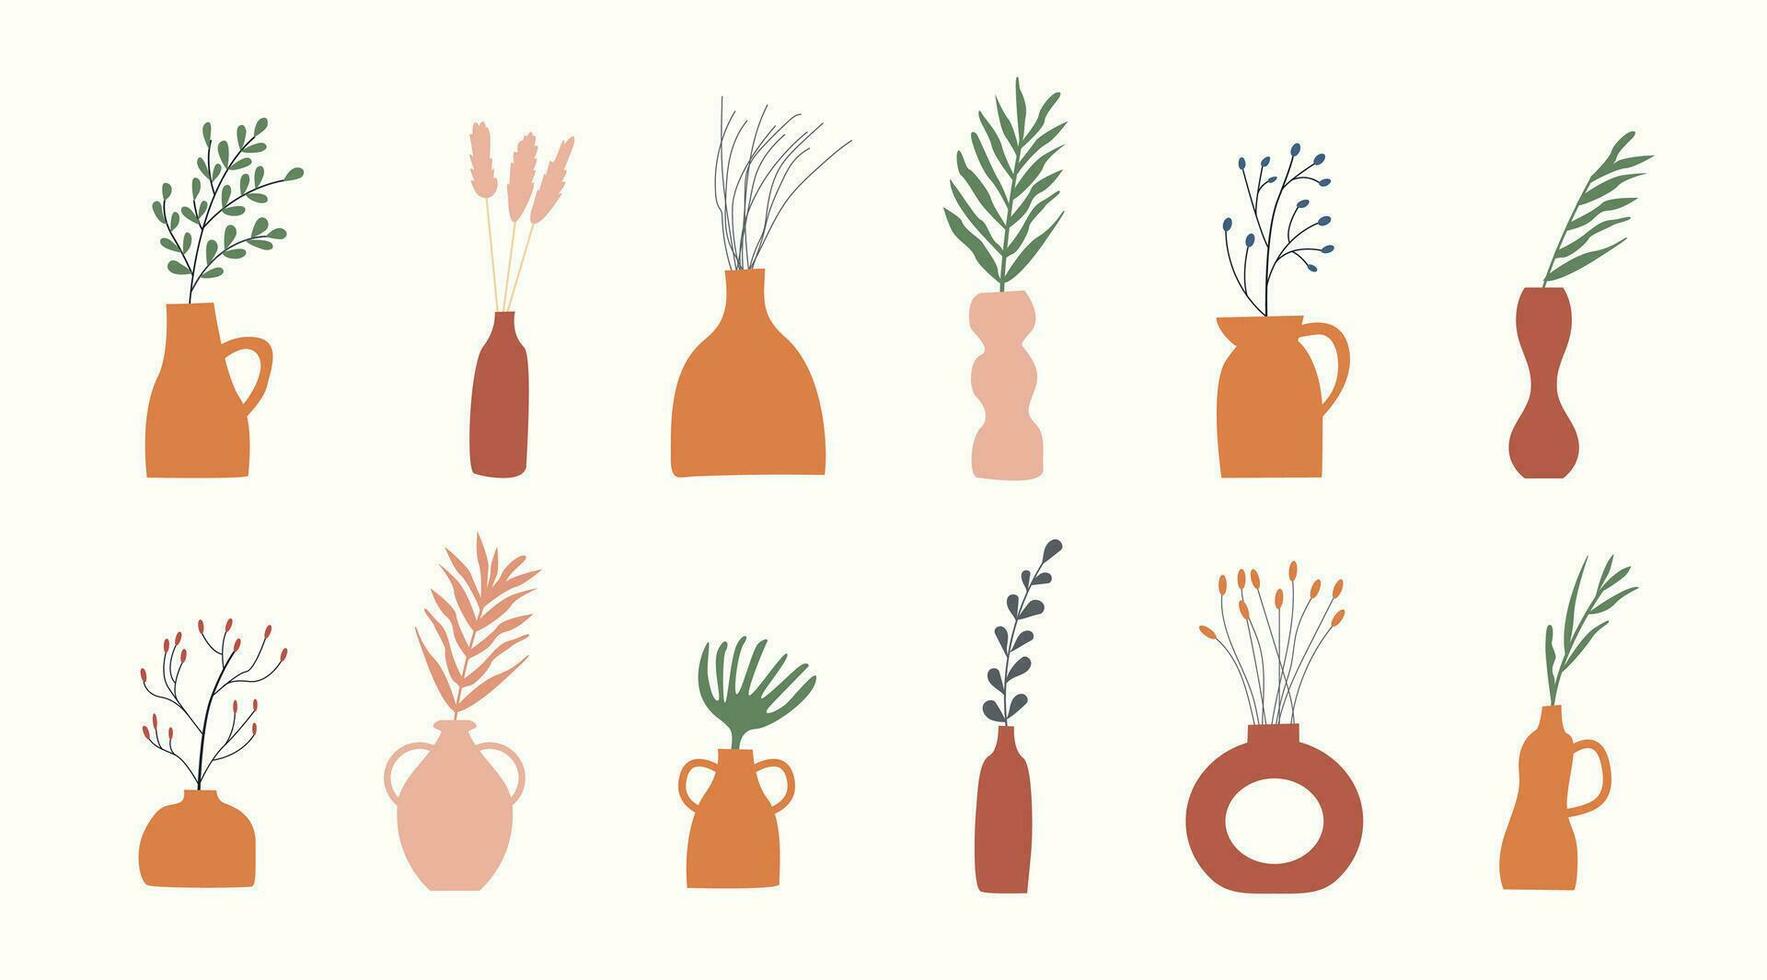 Set of clay vases with potted dry plants, leaves, branches with berries and abstract geometric shape. Autumn mood trendy boho design elements. Fall season organic minimal wall art. Vector illustration